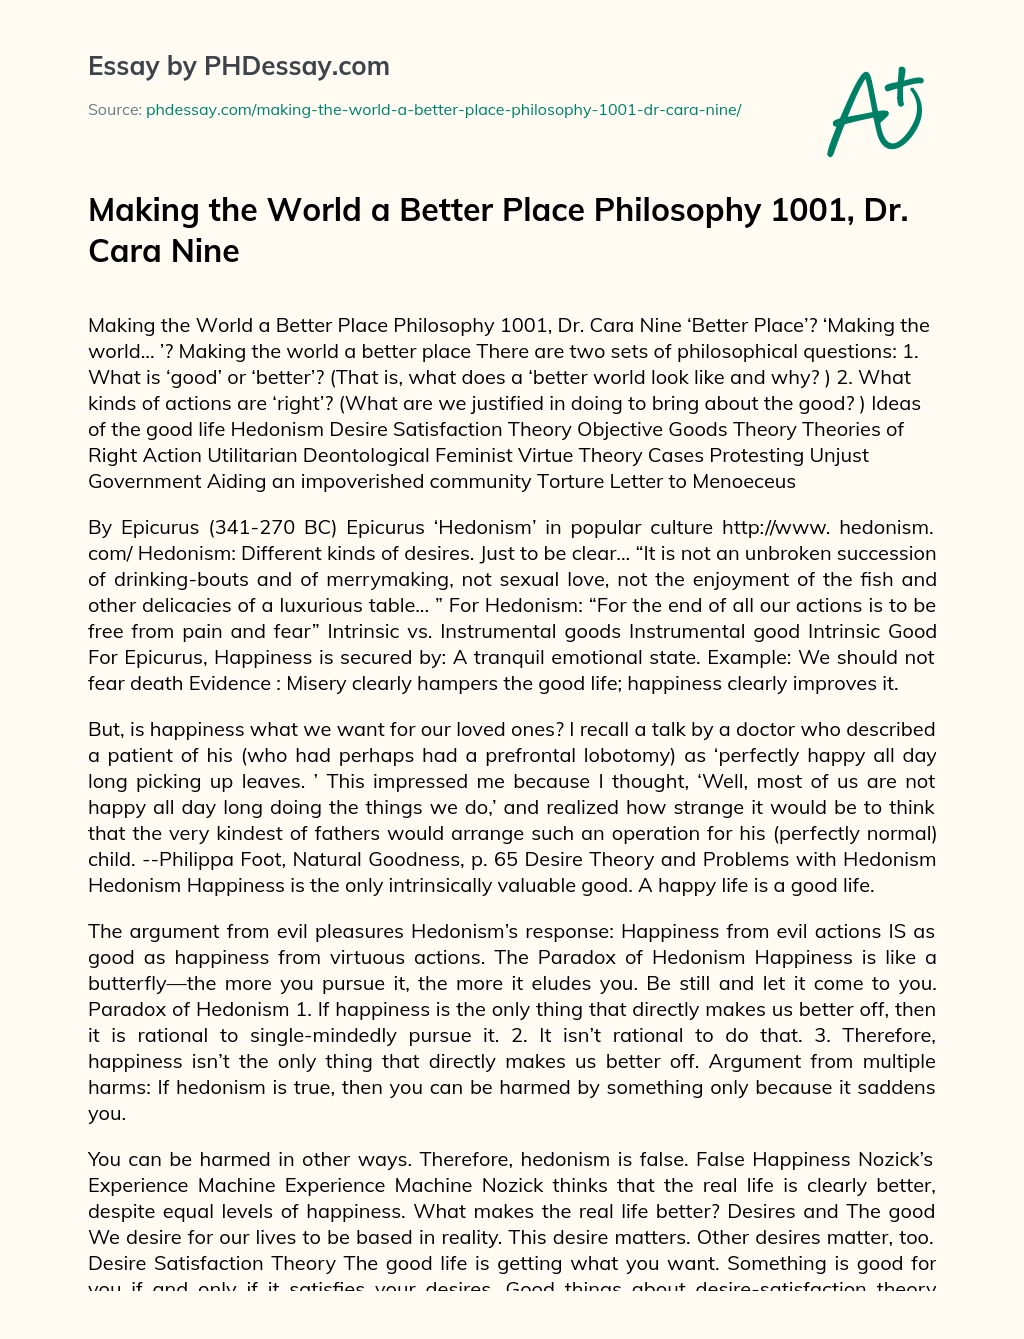 Making the World a Better Place Philosophy 1001, Dr. Cara Nine essay